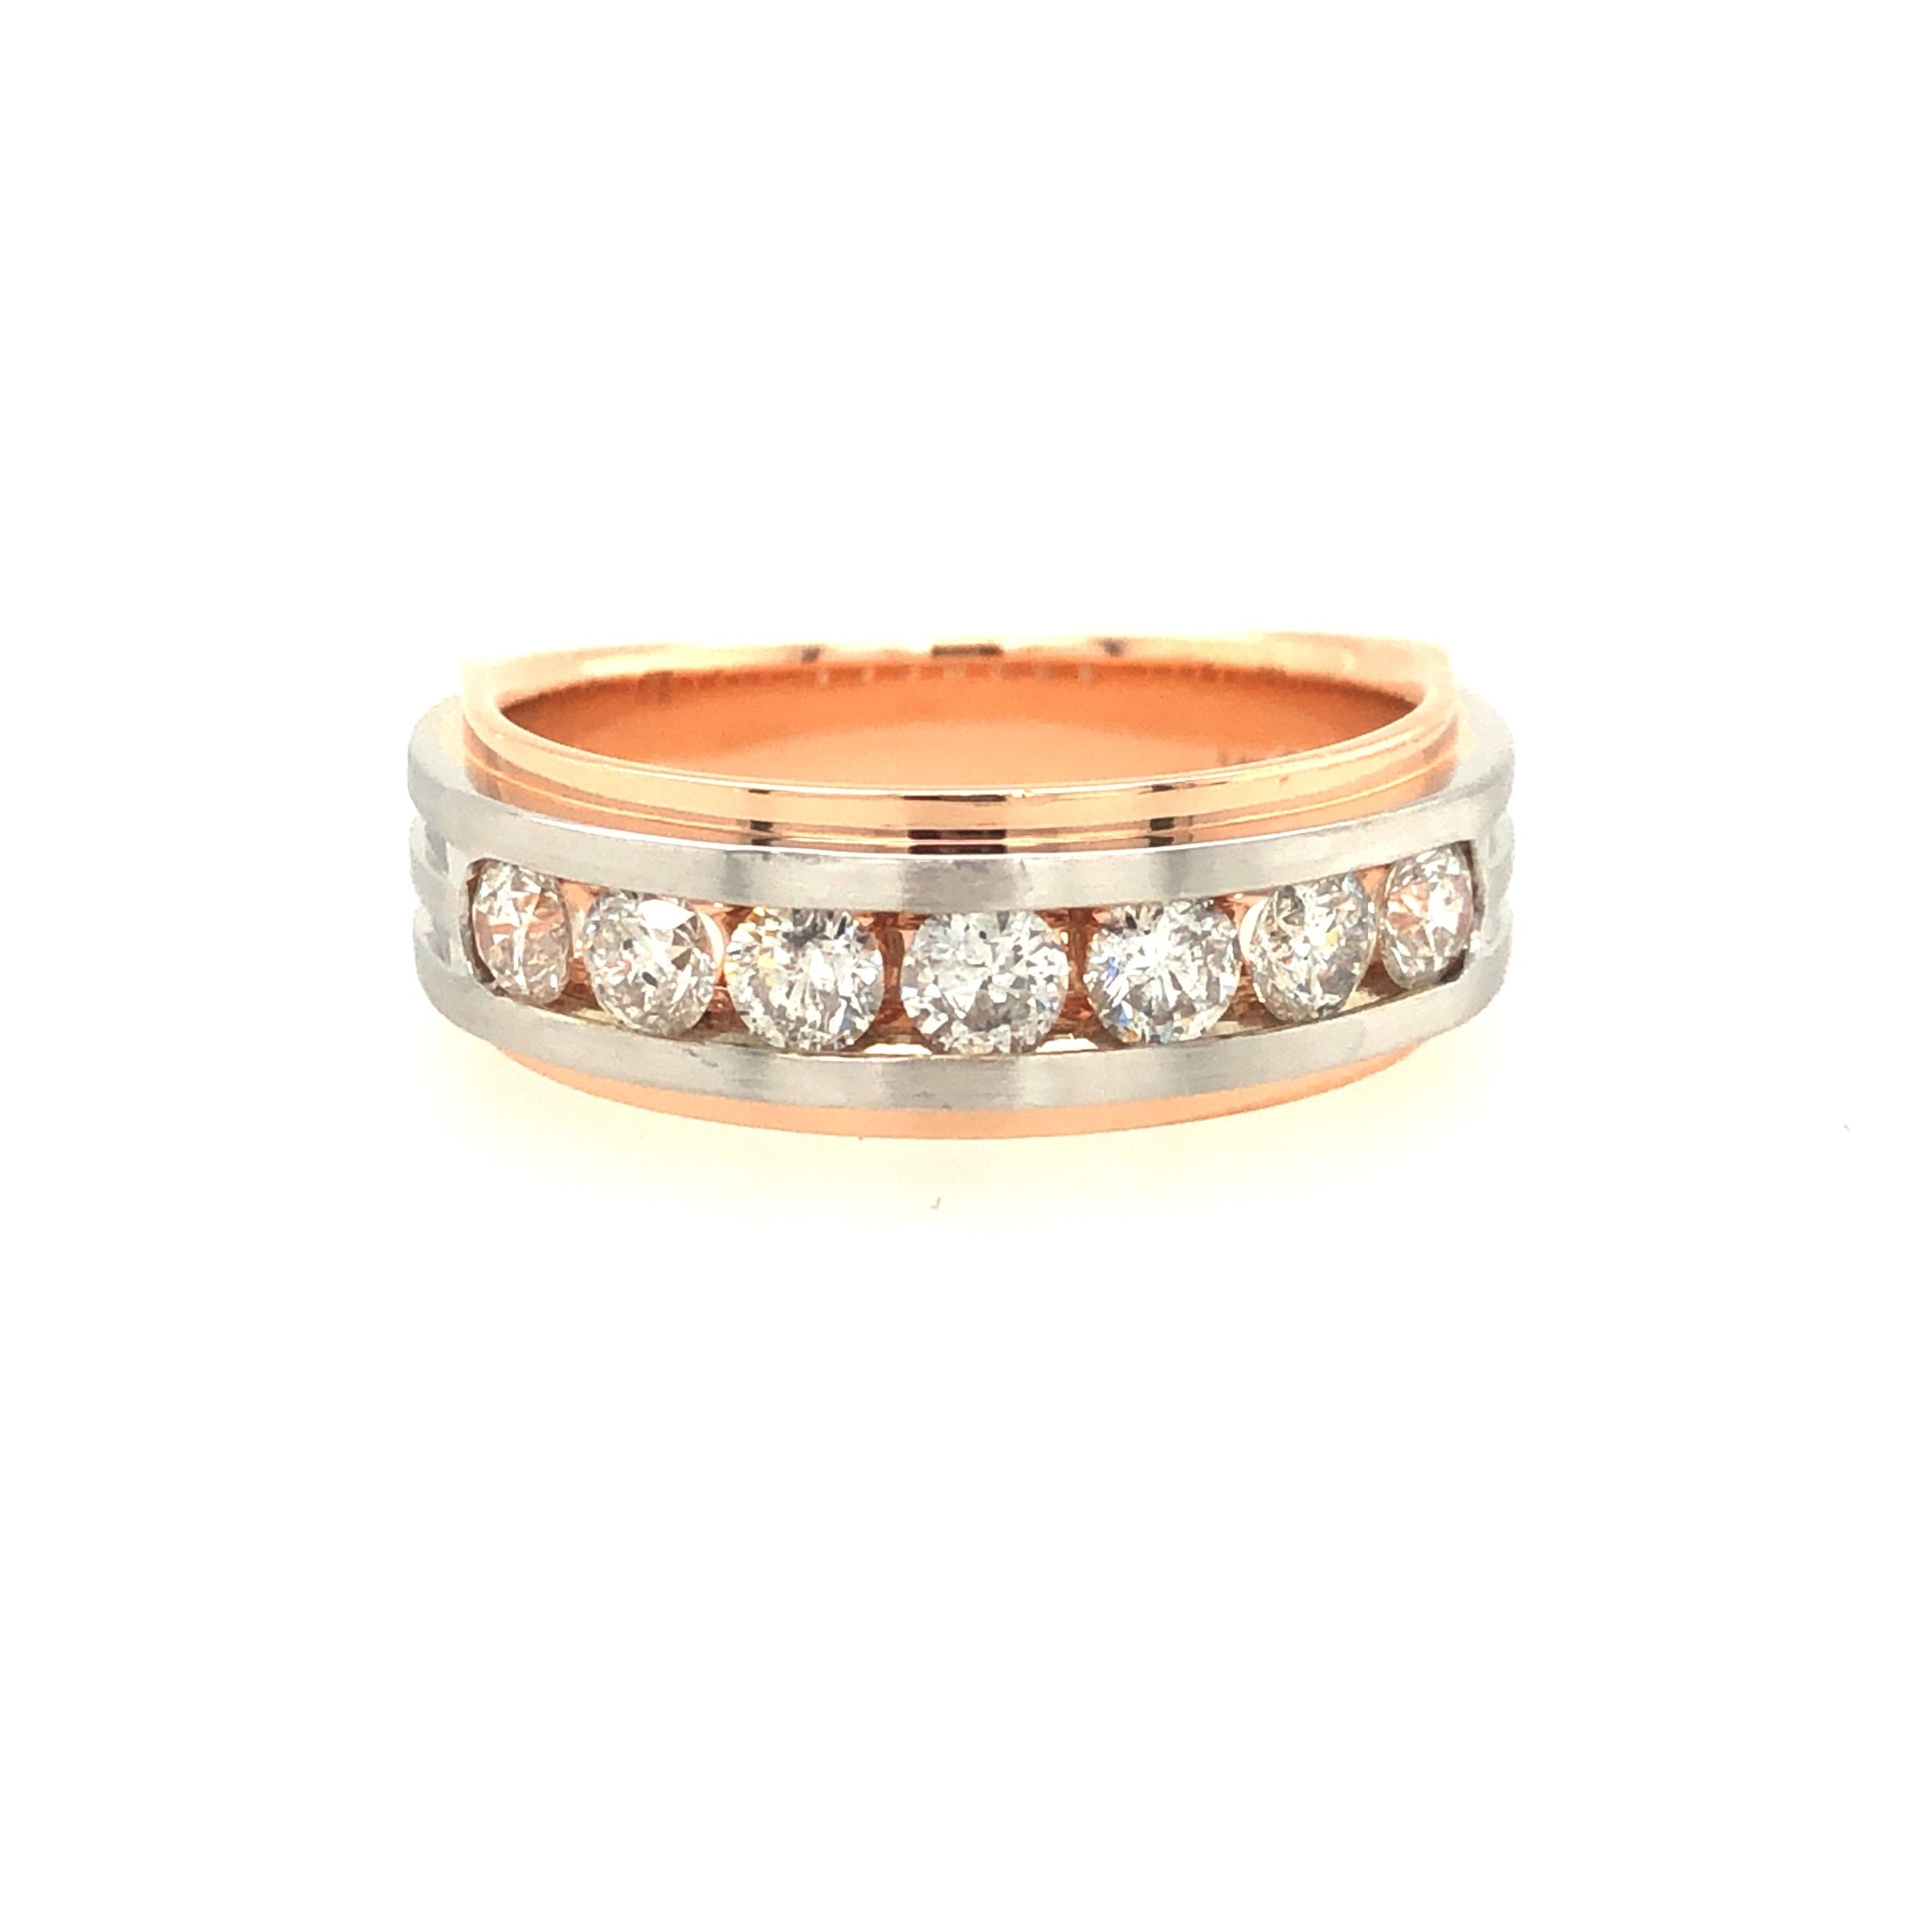 475031 14K TWO-TONE WHITE AND ROSE GOLD 1CT DIAMOND CHANNEL SET MENS WEDDING BAND